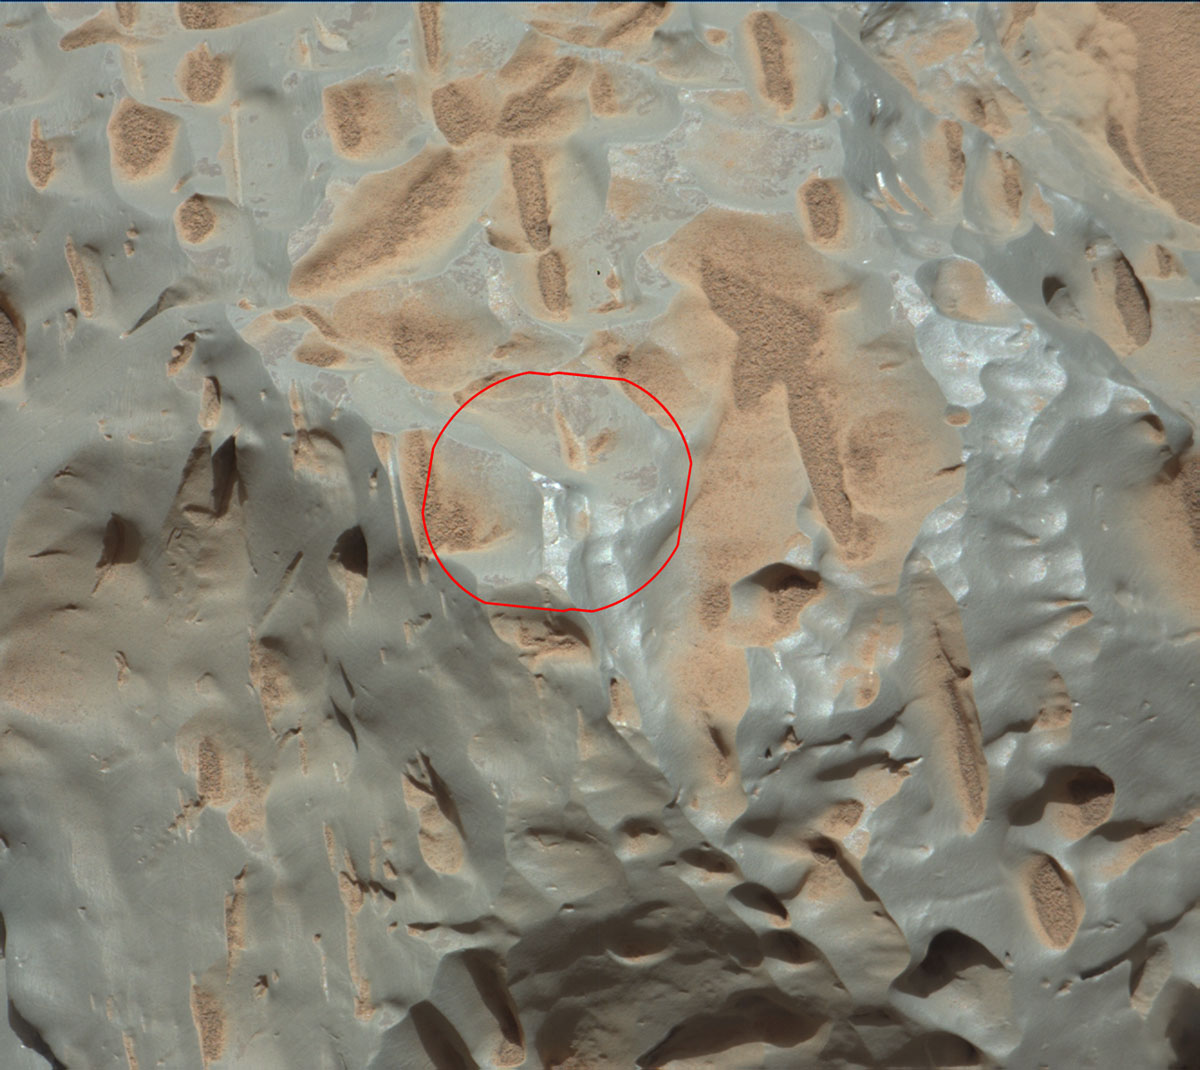 A close-up of Cacao as viewed through Curiosity’s ChemCam instrument.